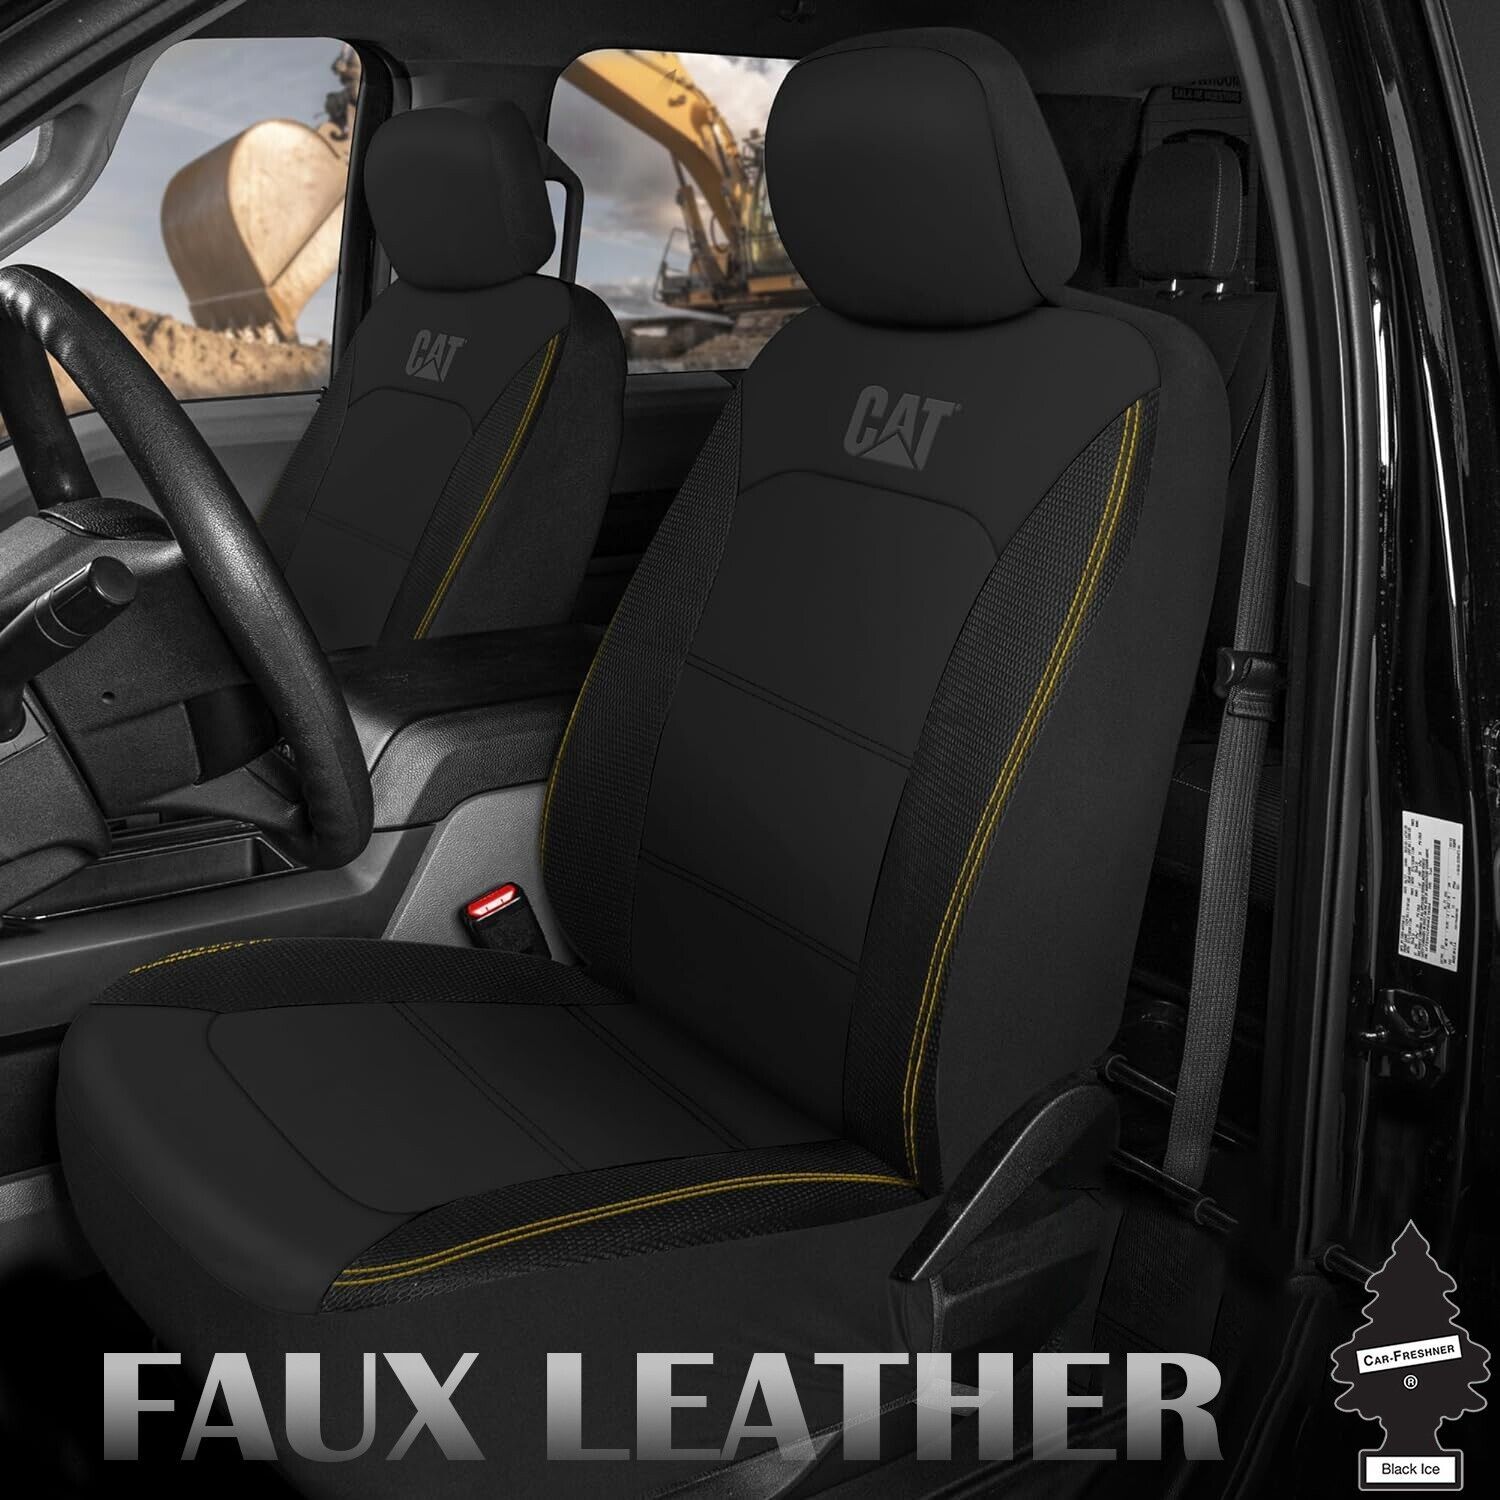 Primary image for For CHEVY Caterpillar Car Truck Seat Covers for Front Seats Set Faux Leather